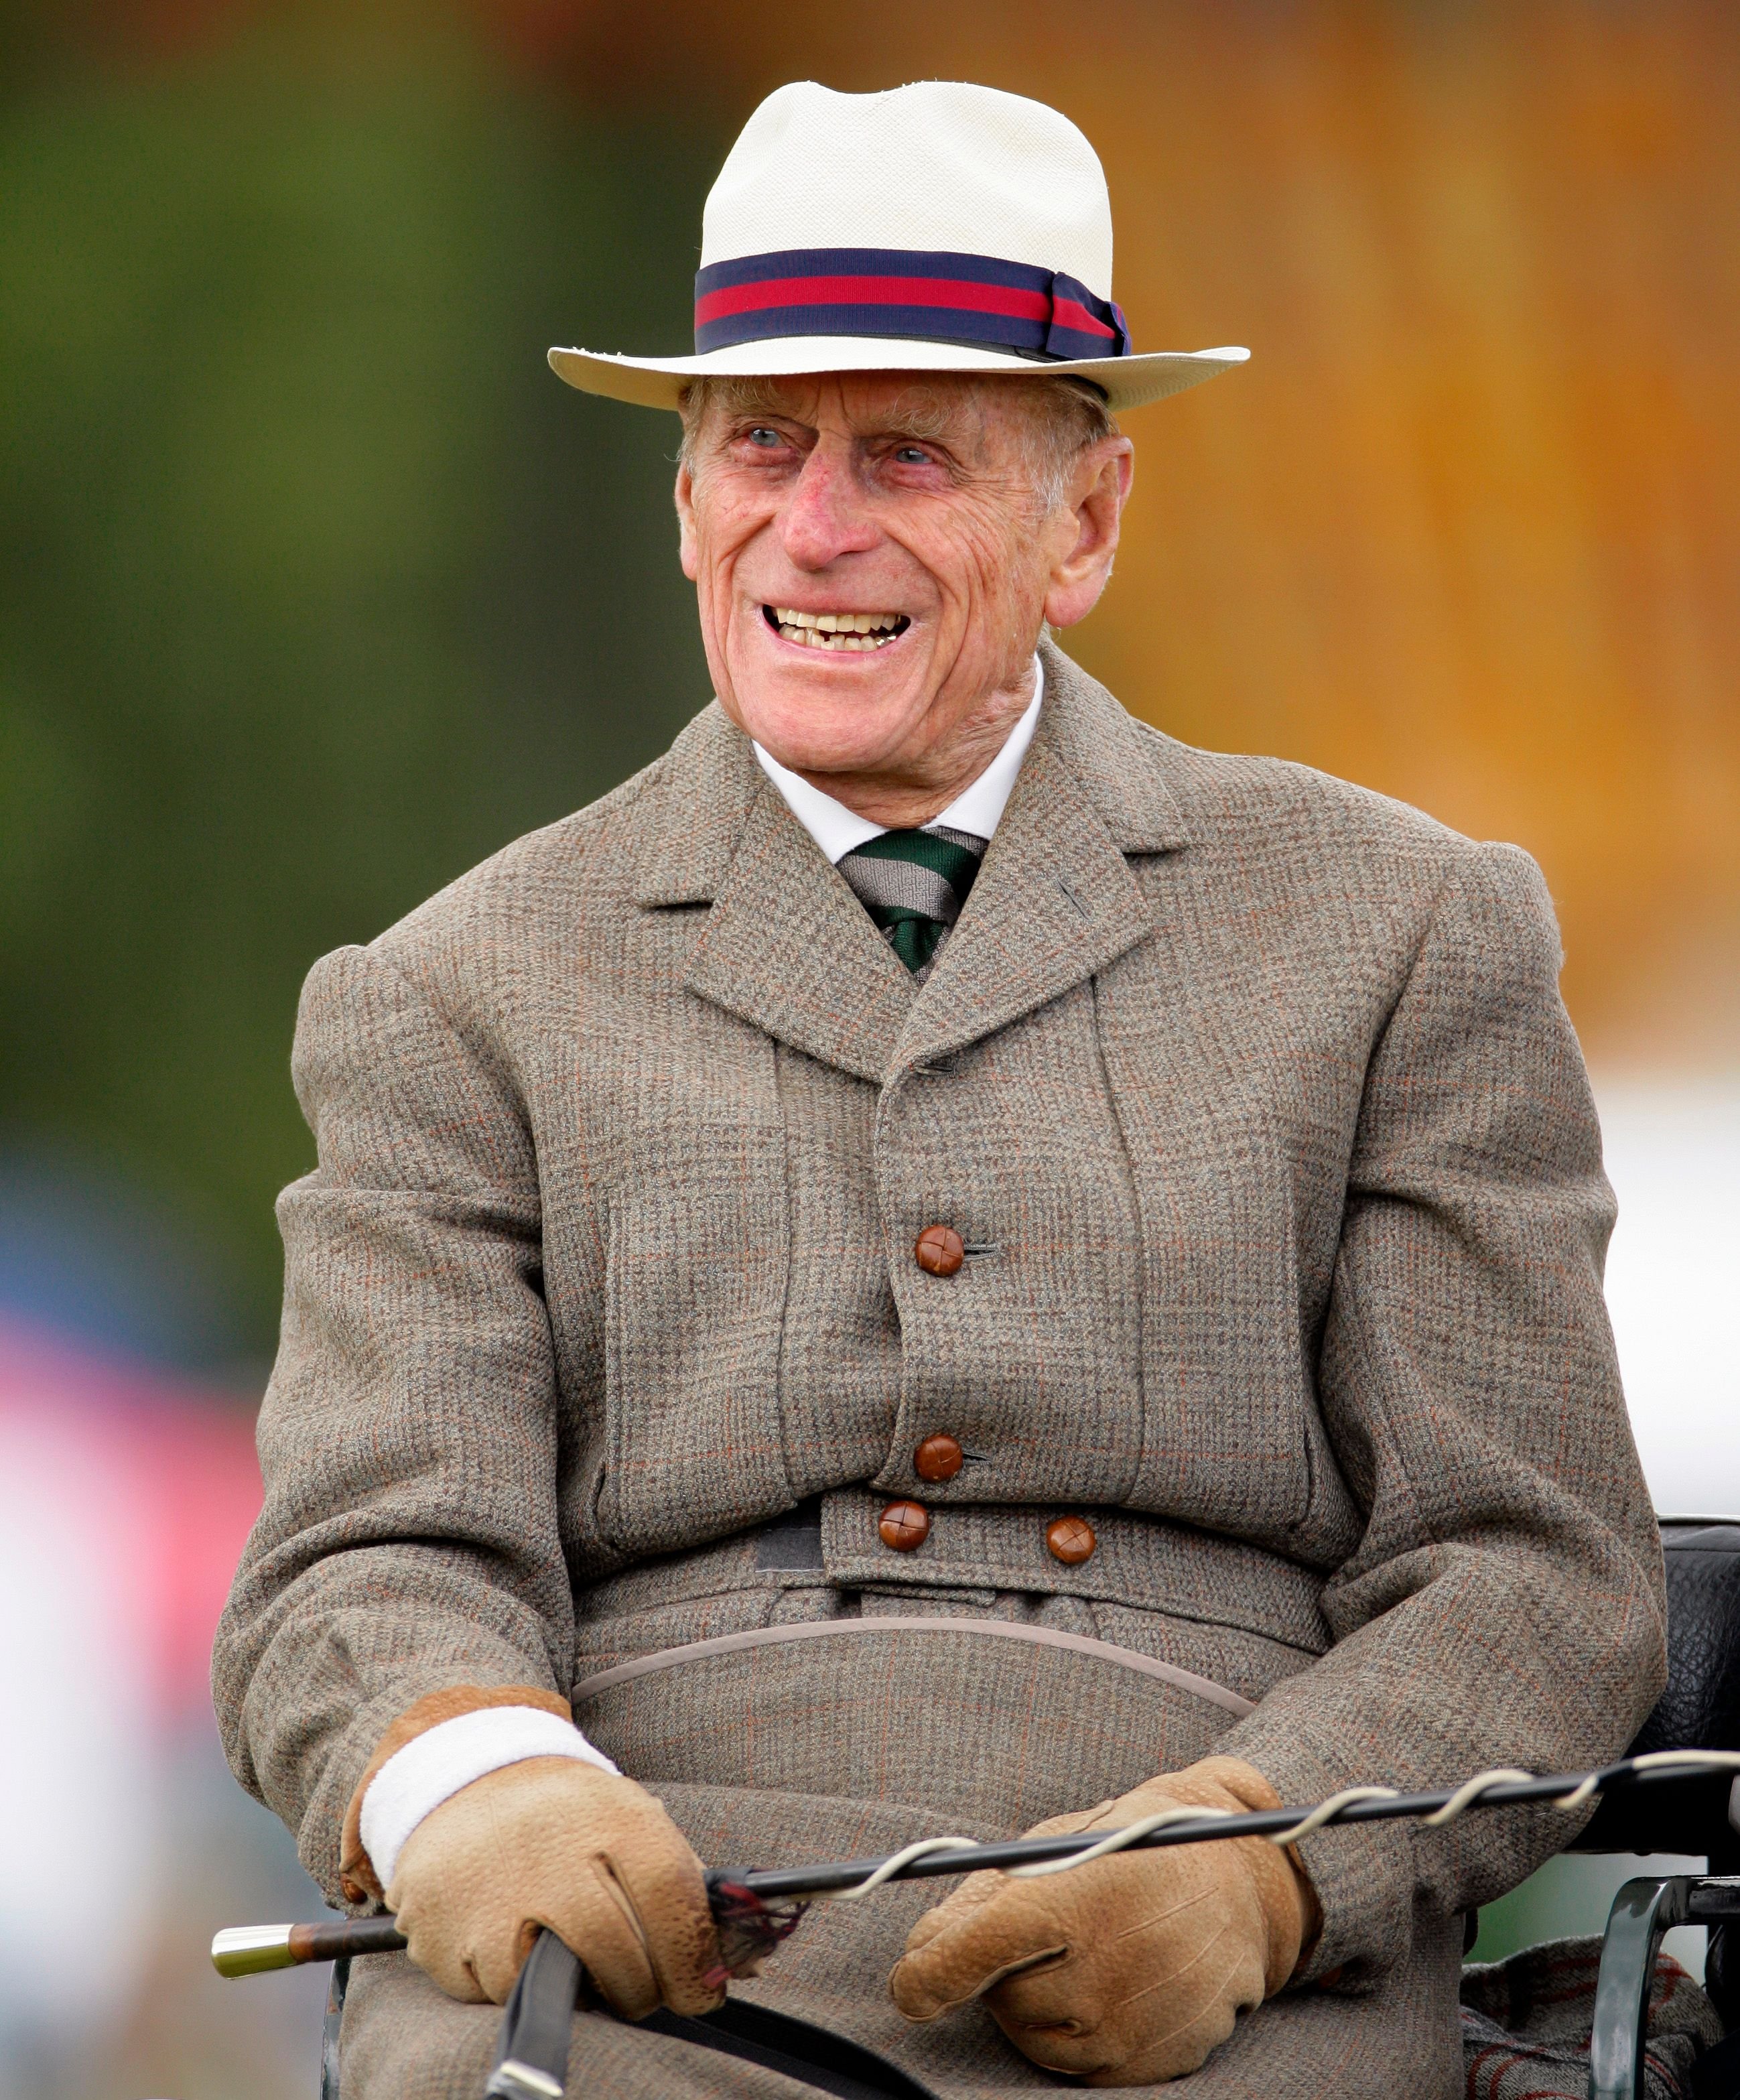 Prince Philip on May 15, 2011 in Windsor, England. | Photo: Getty Images